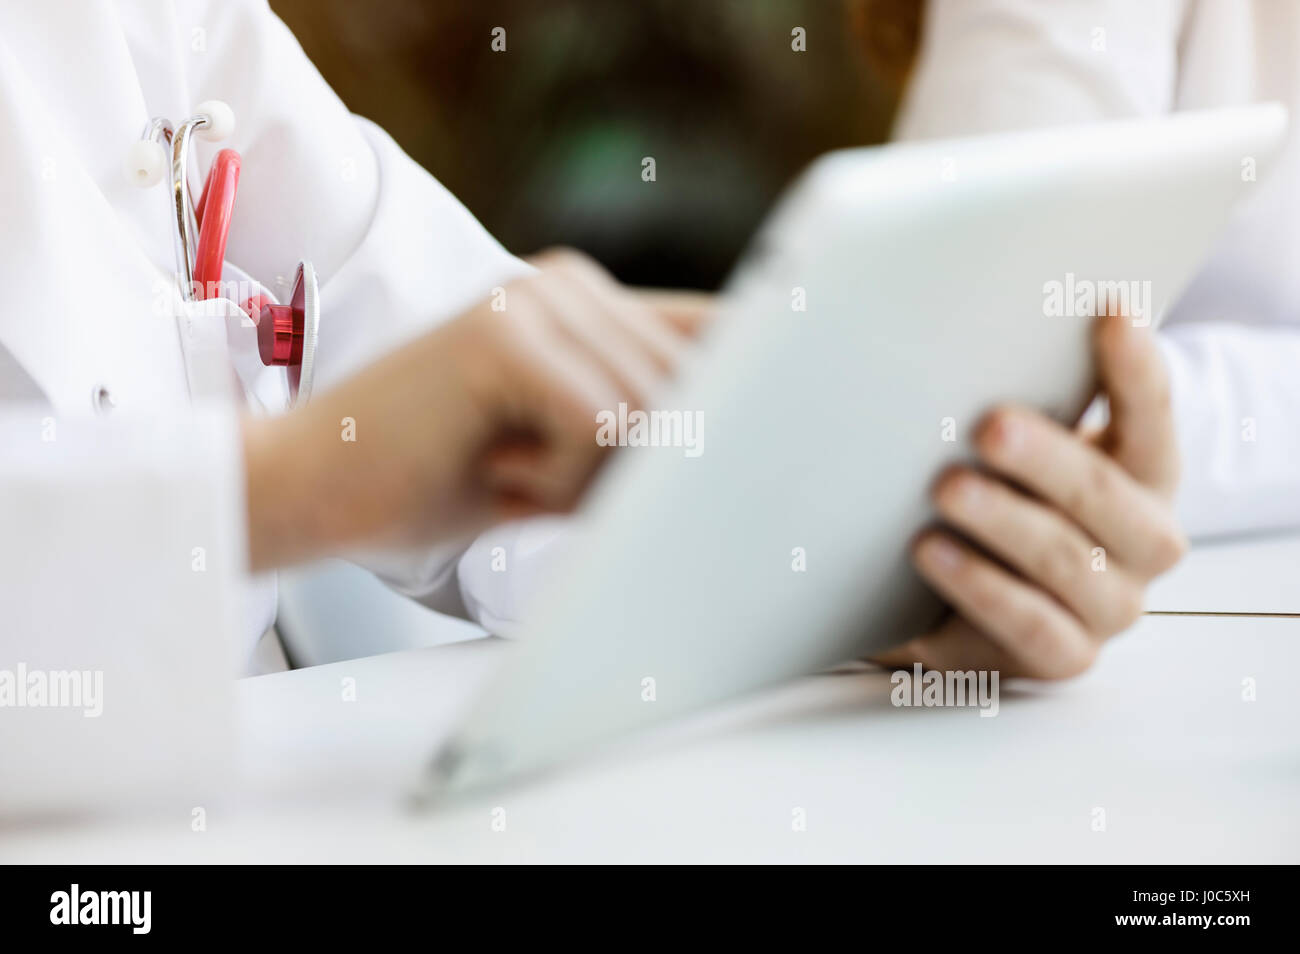 Doctor using digital tablet, close-up Stock Photo